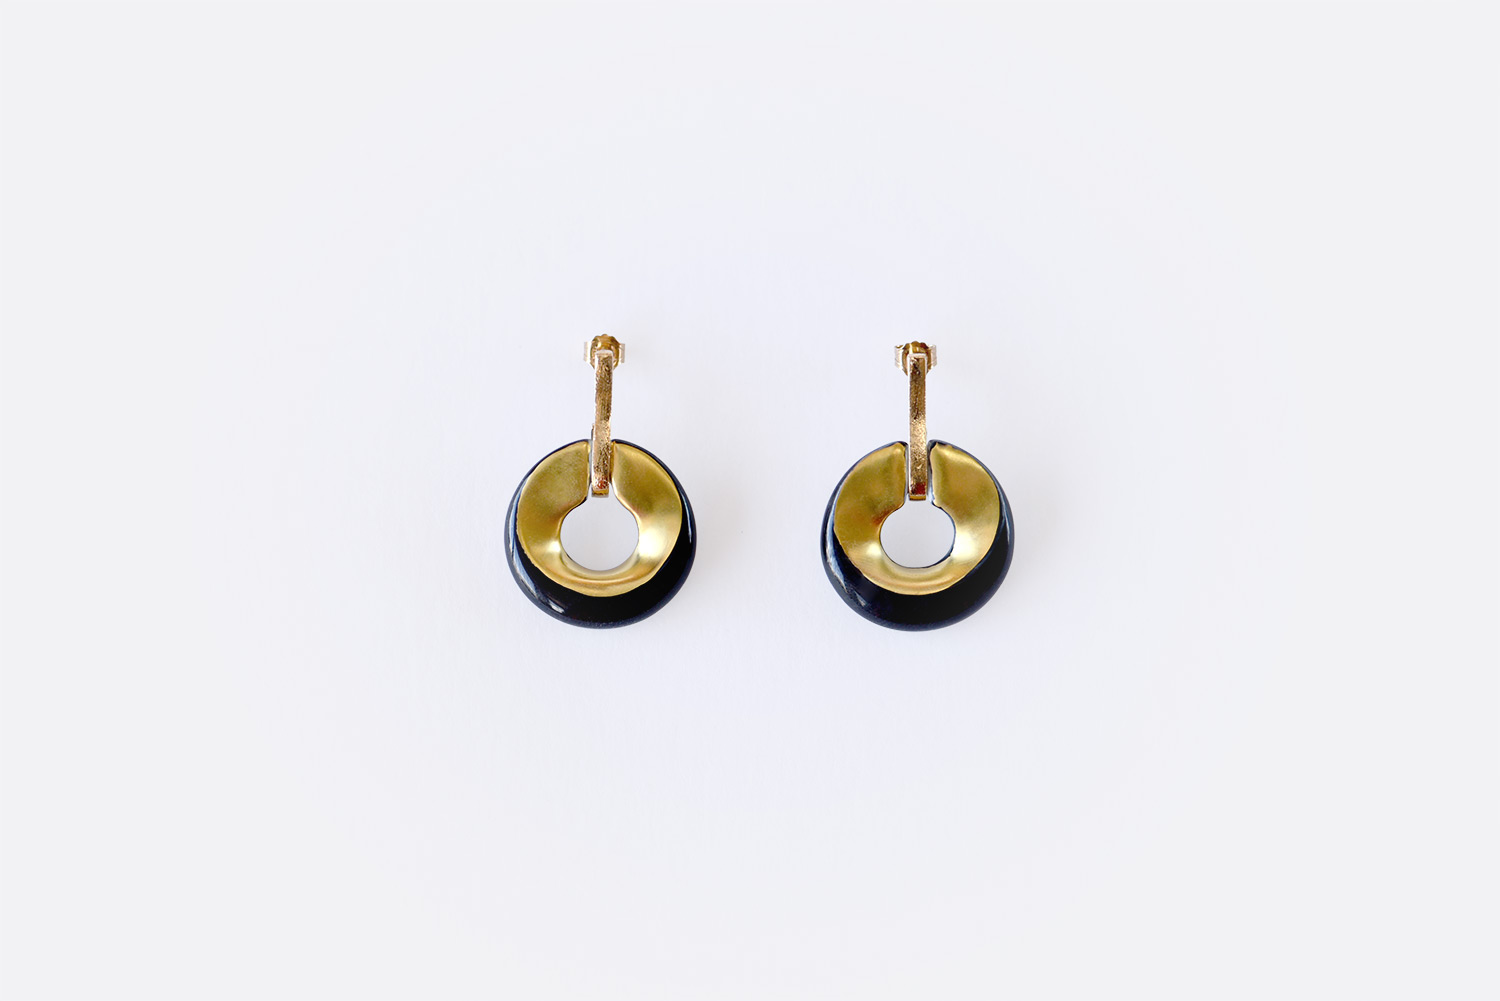 China Earrings of the collection ALBA NOIR ET OR | Bernardaud